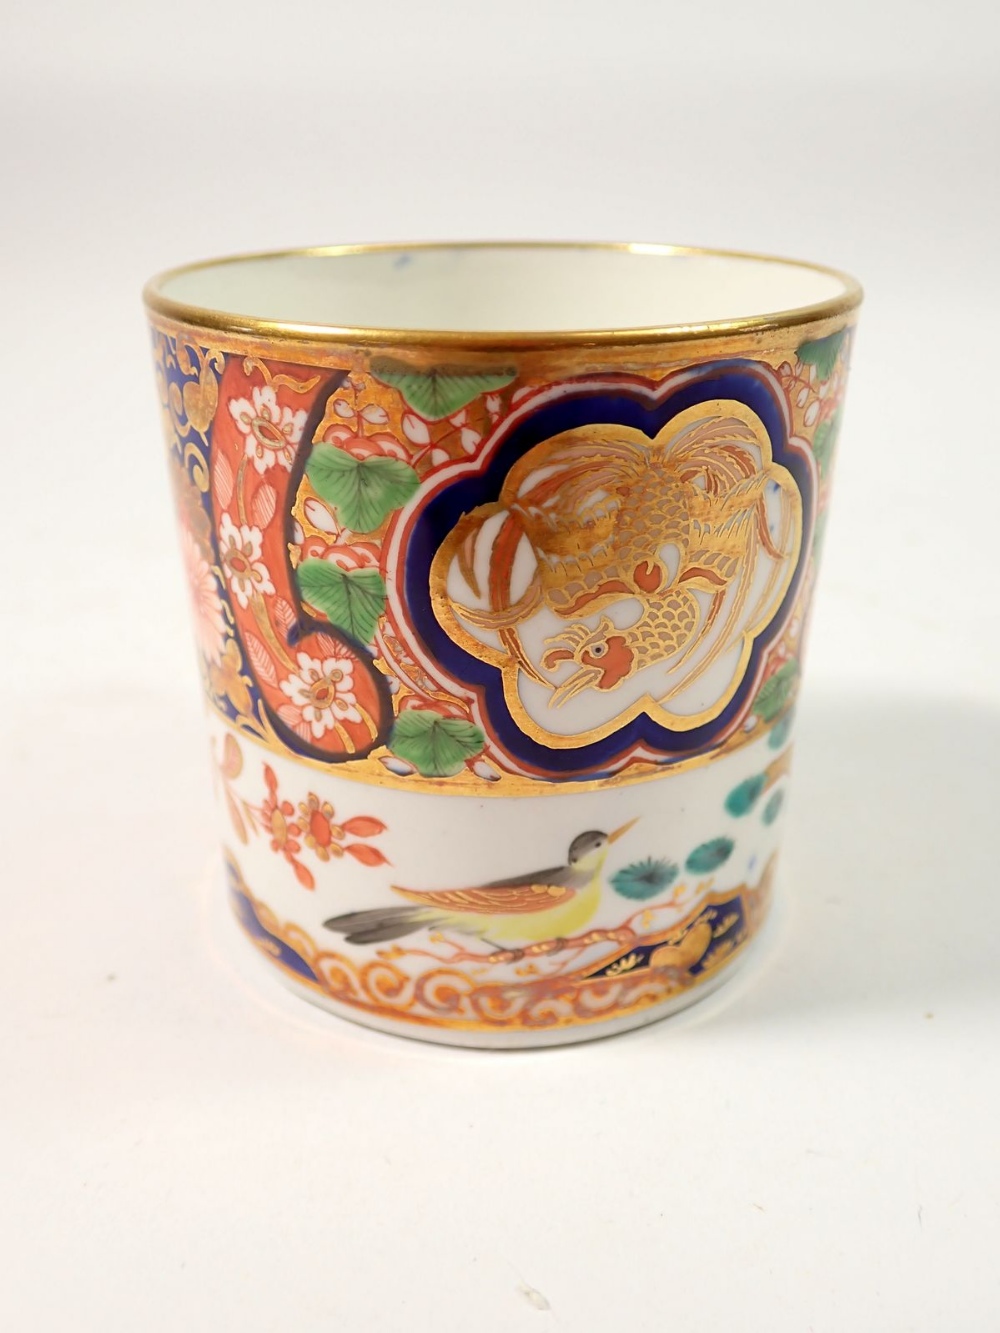 A fine early 19th century Spode tea and coffee service in the London shape, pattern No. 1291 painted - Image 17 of 18